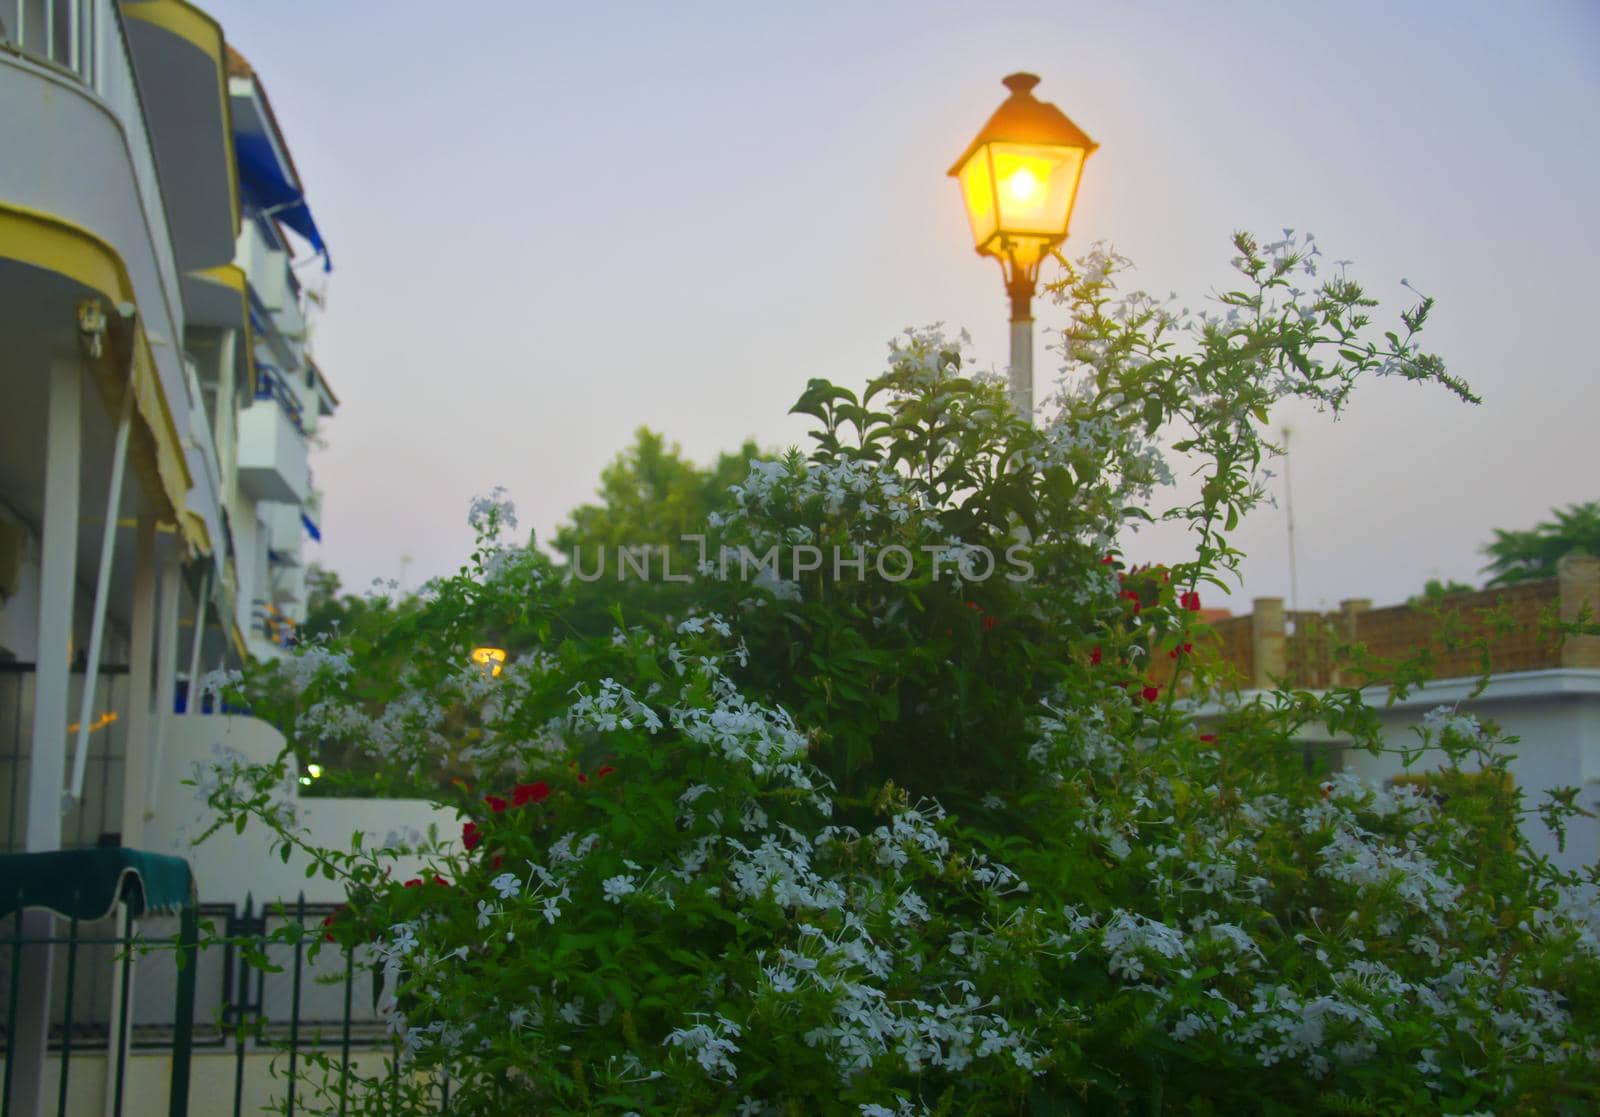 Yellow lantern behind the bush of flowers, evening time, summer